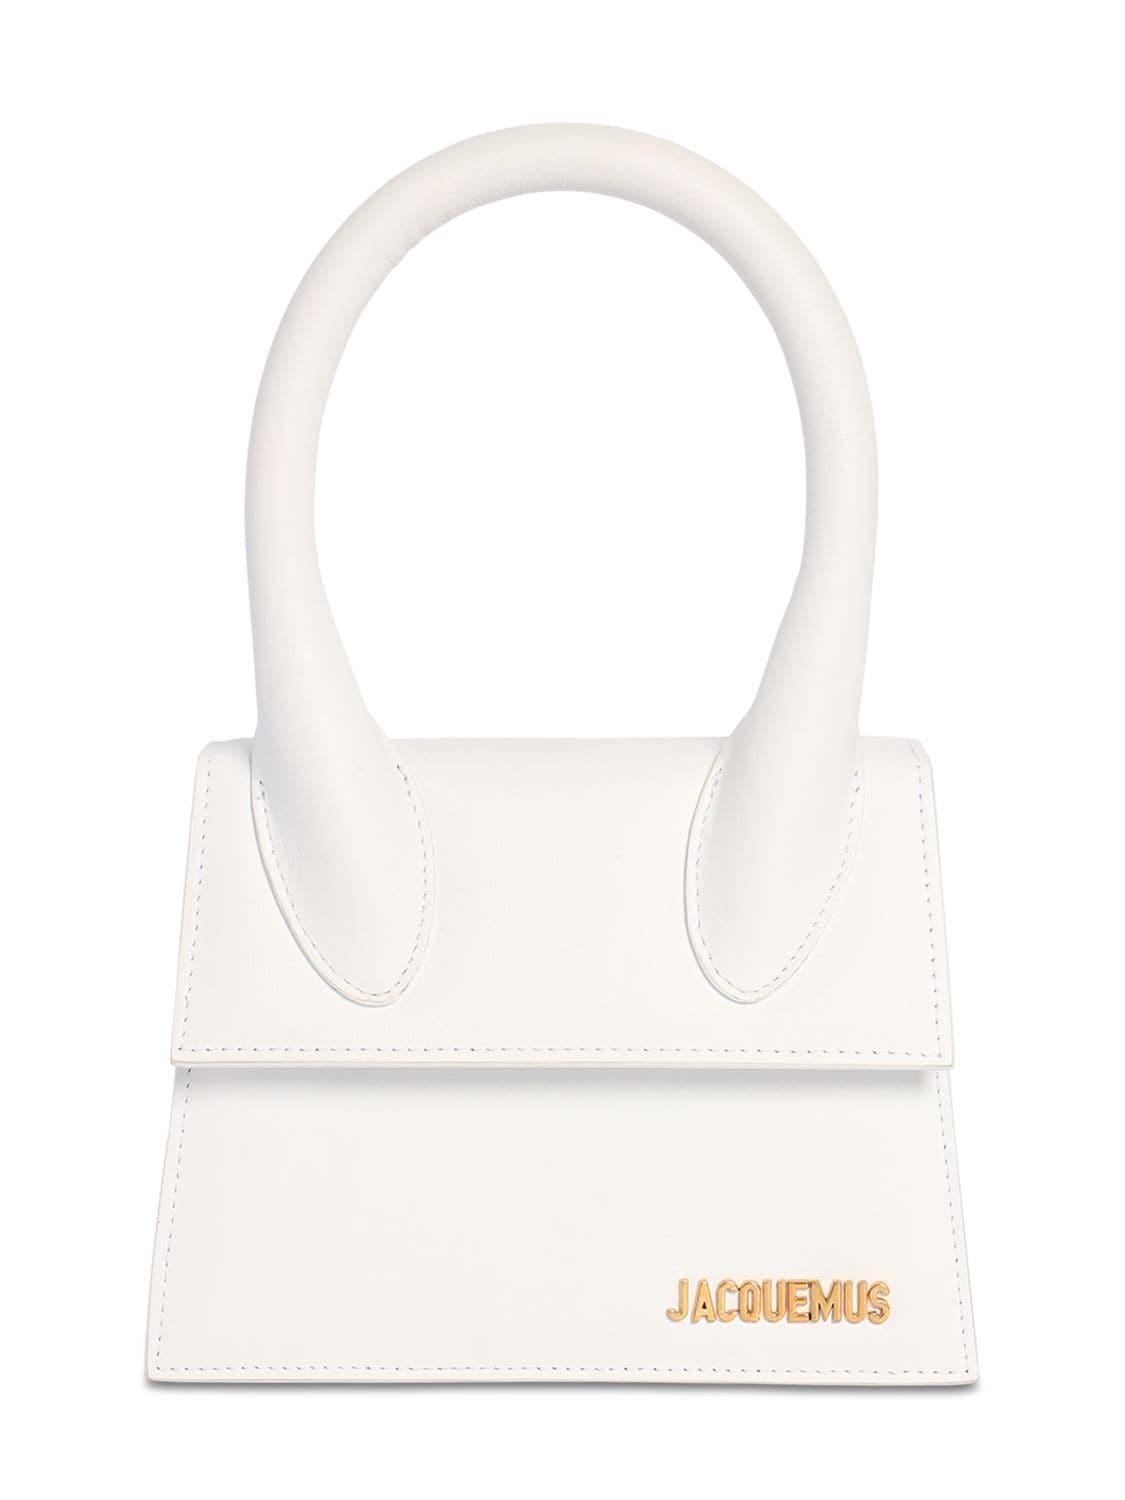 Jacquemus Le Chiquito Leather Top-handle Bag in White | Lyst